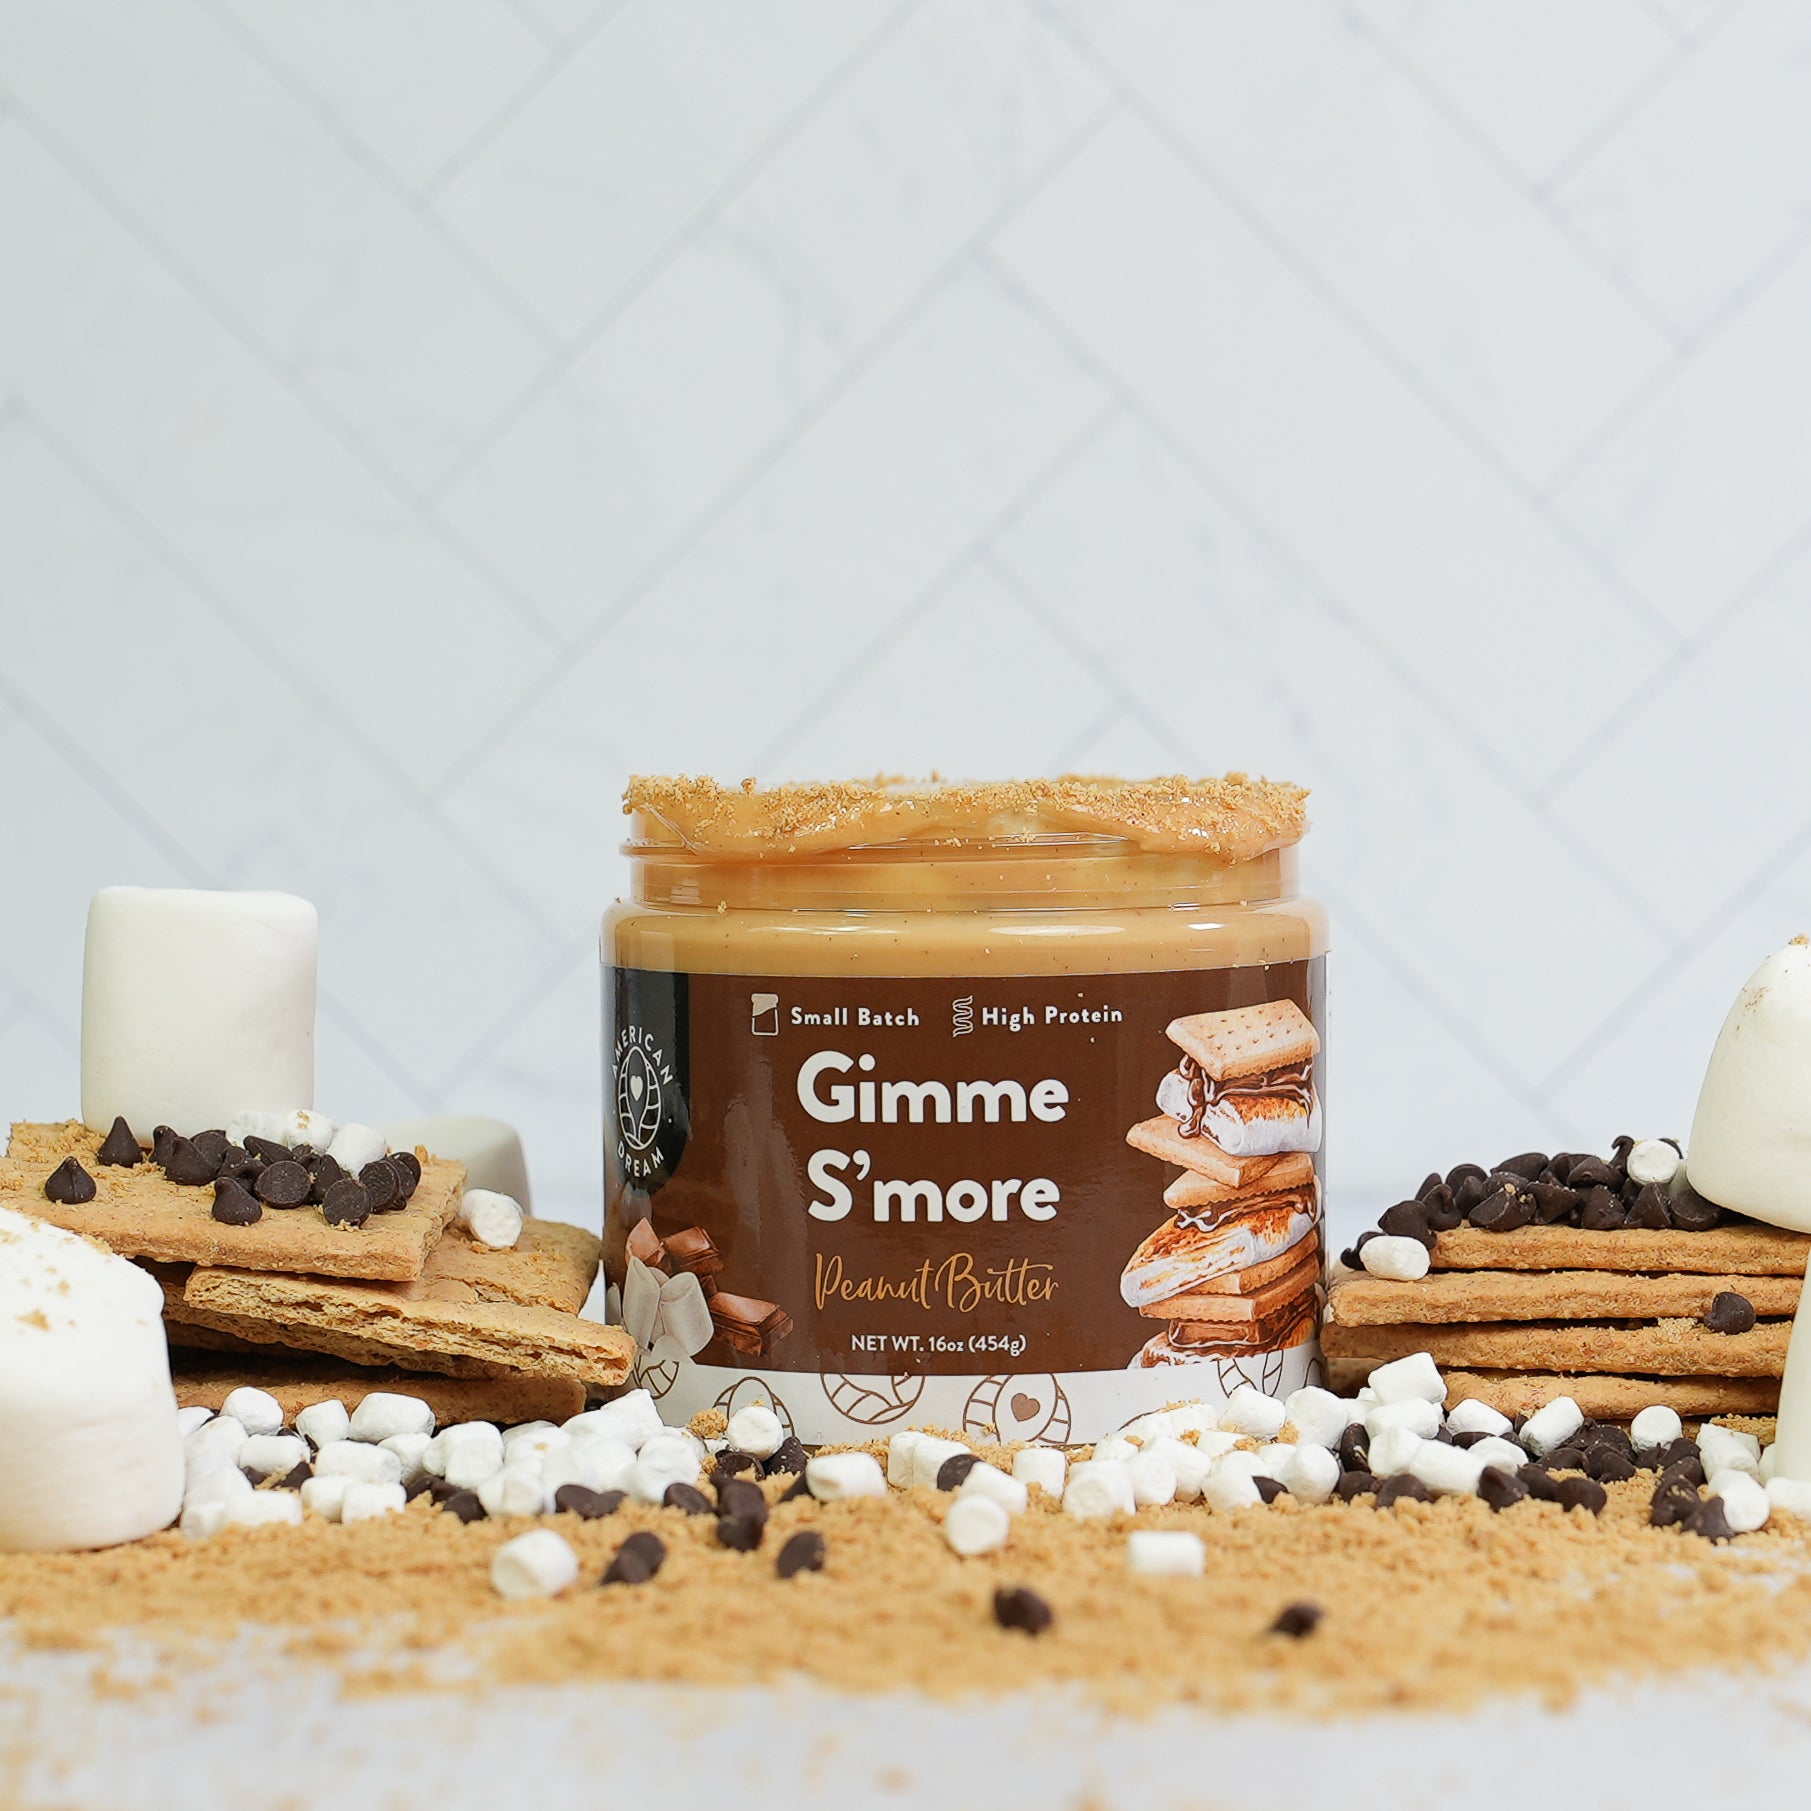 Gimme S'more Peanut Butter